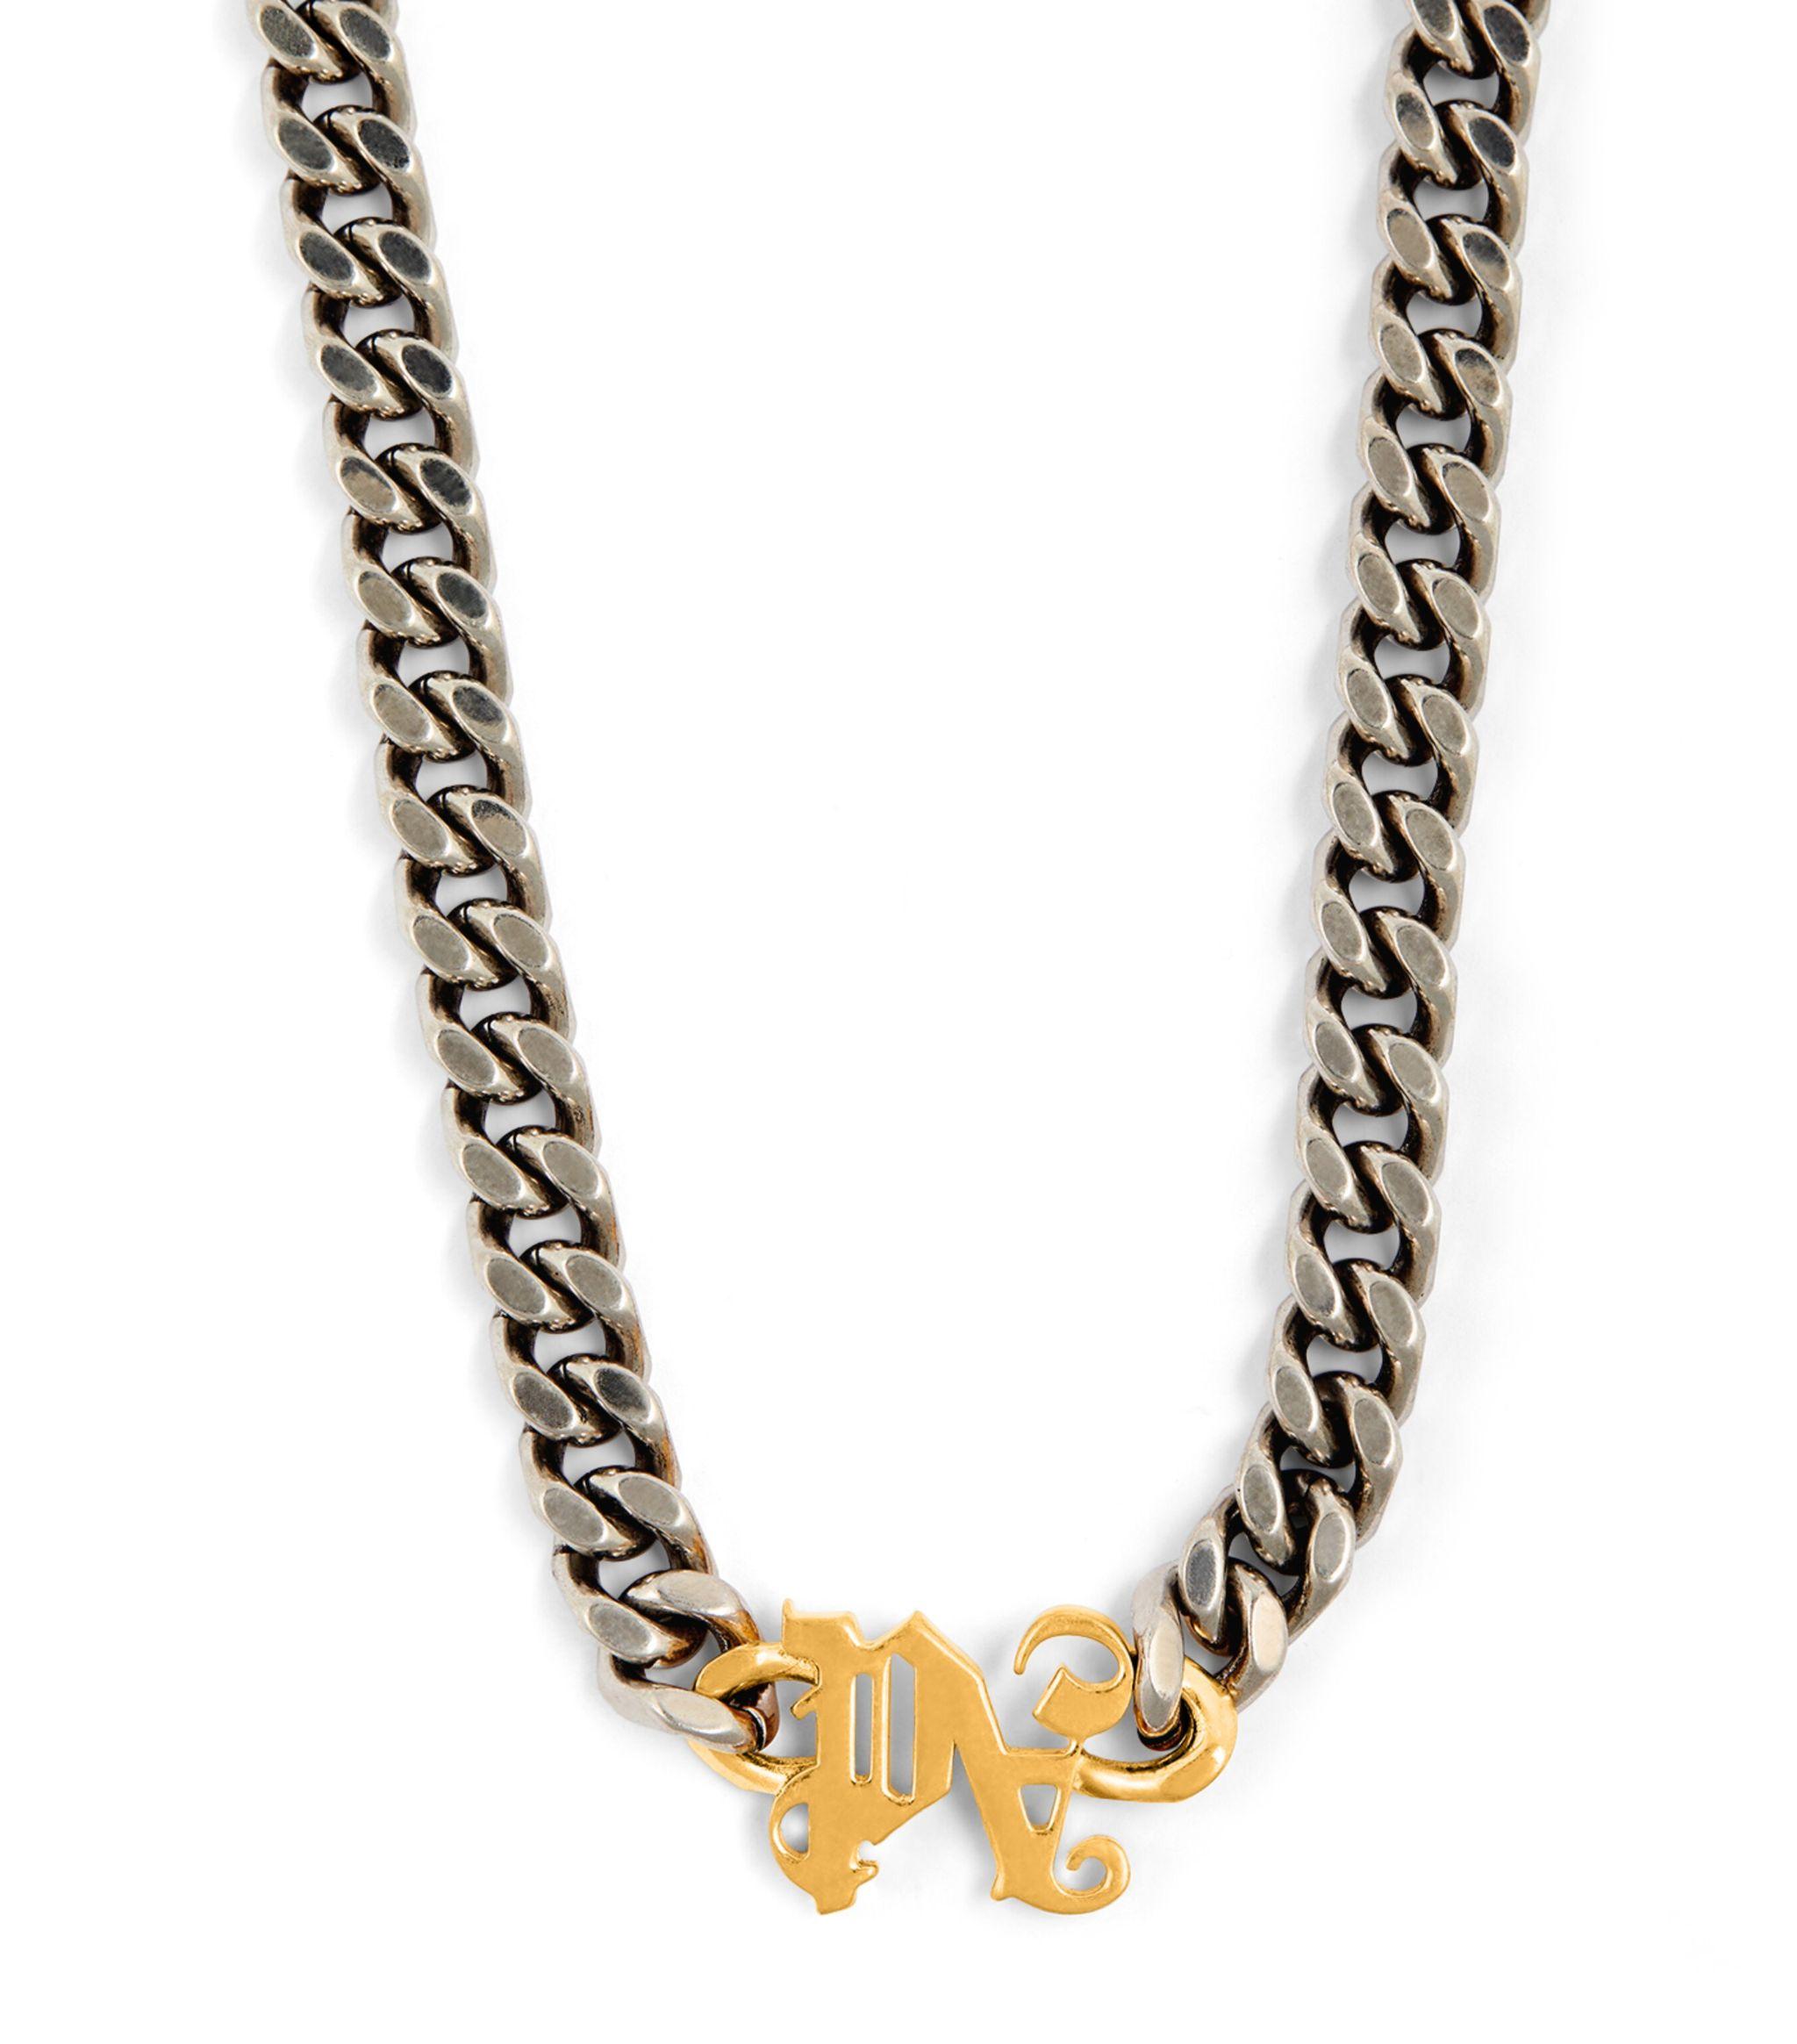 Monogram Chain Necklace In Silver